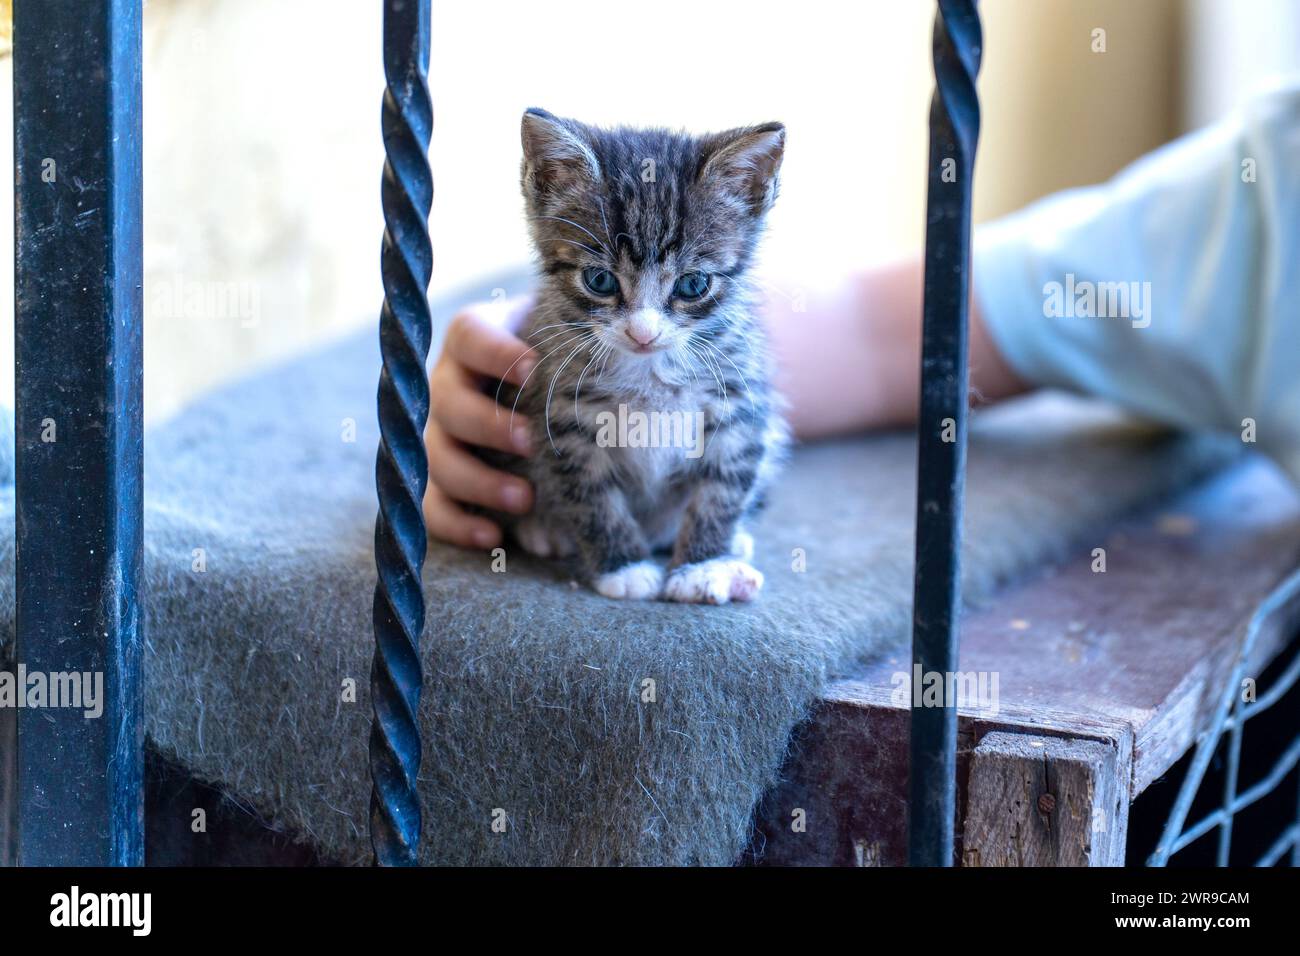 Whiskers and wonders. A tale of little kitty embrace. A story of innocent bonding. Stock Photo